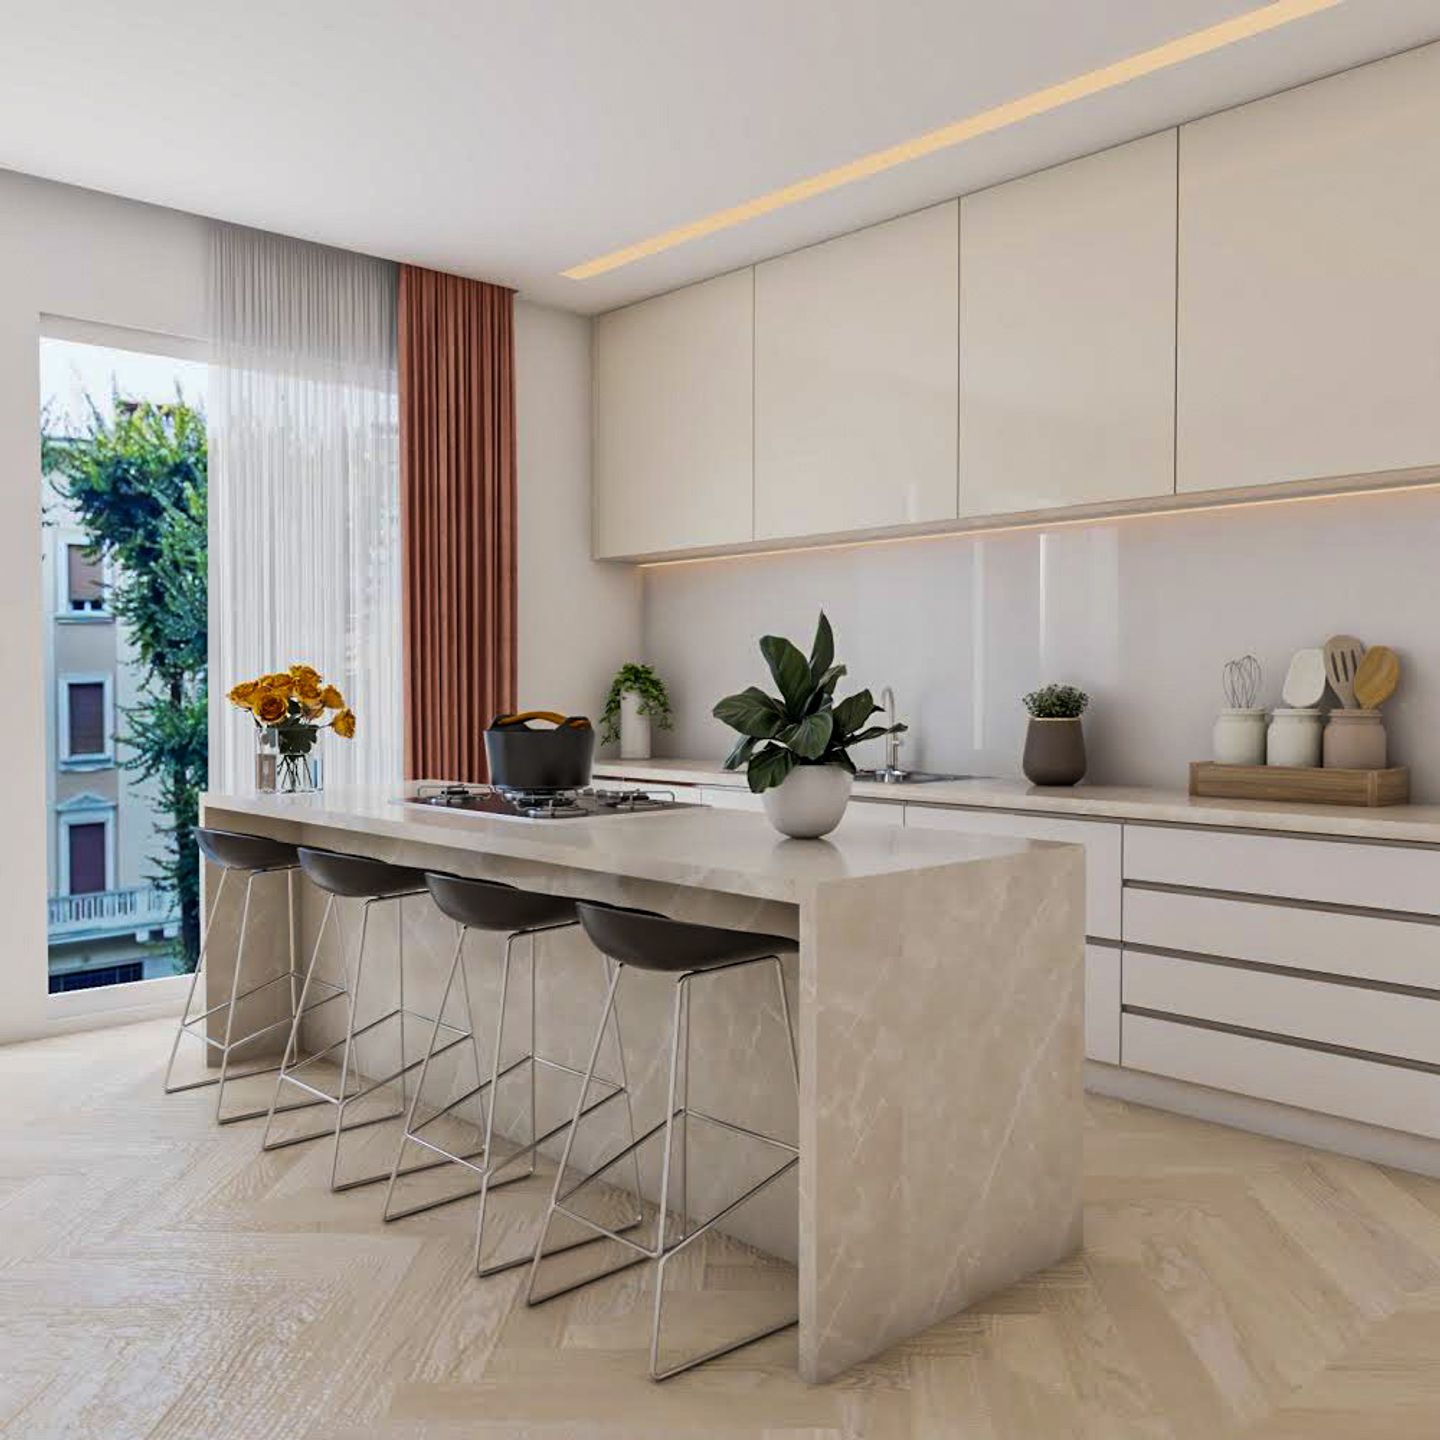 Glossy Beige And White Straight Kitchen Design With Island - Livspace